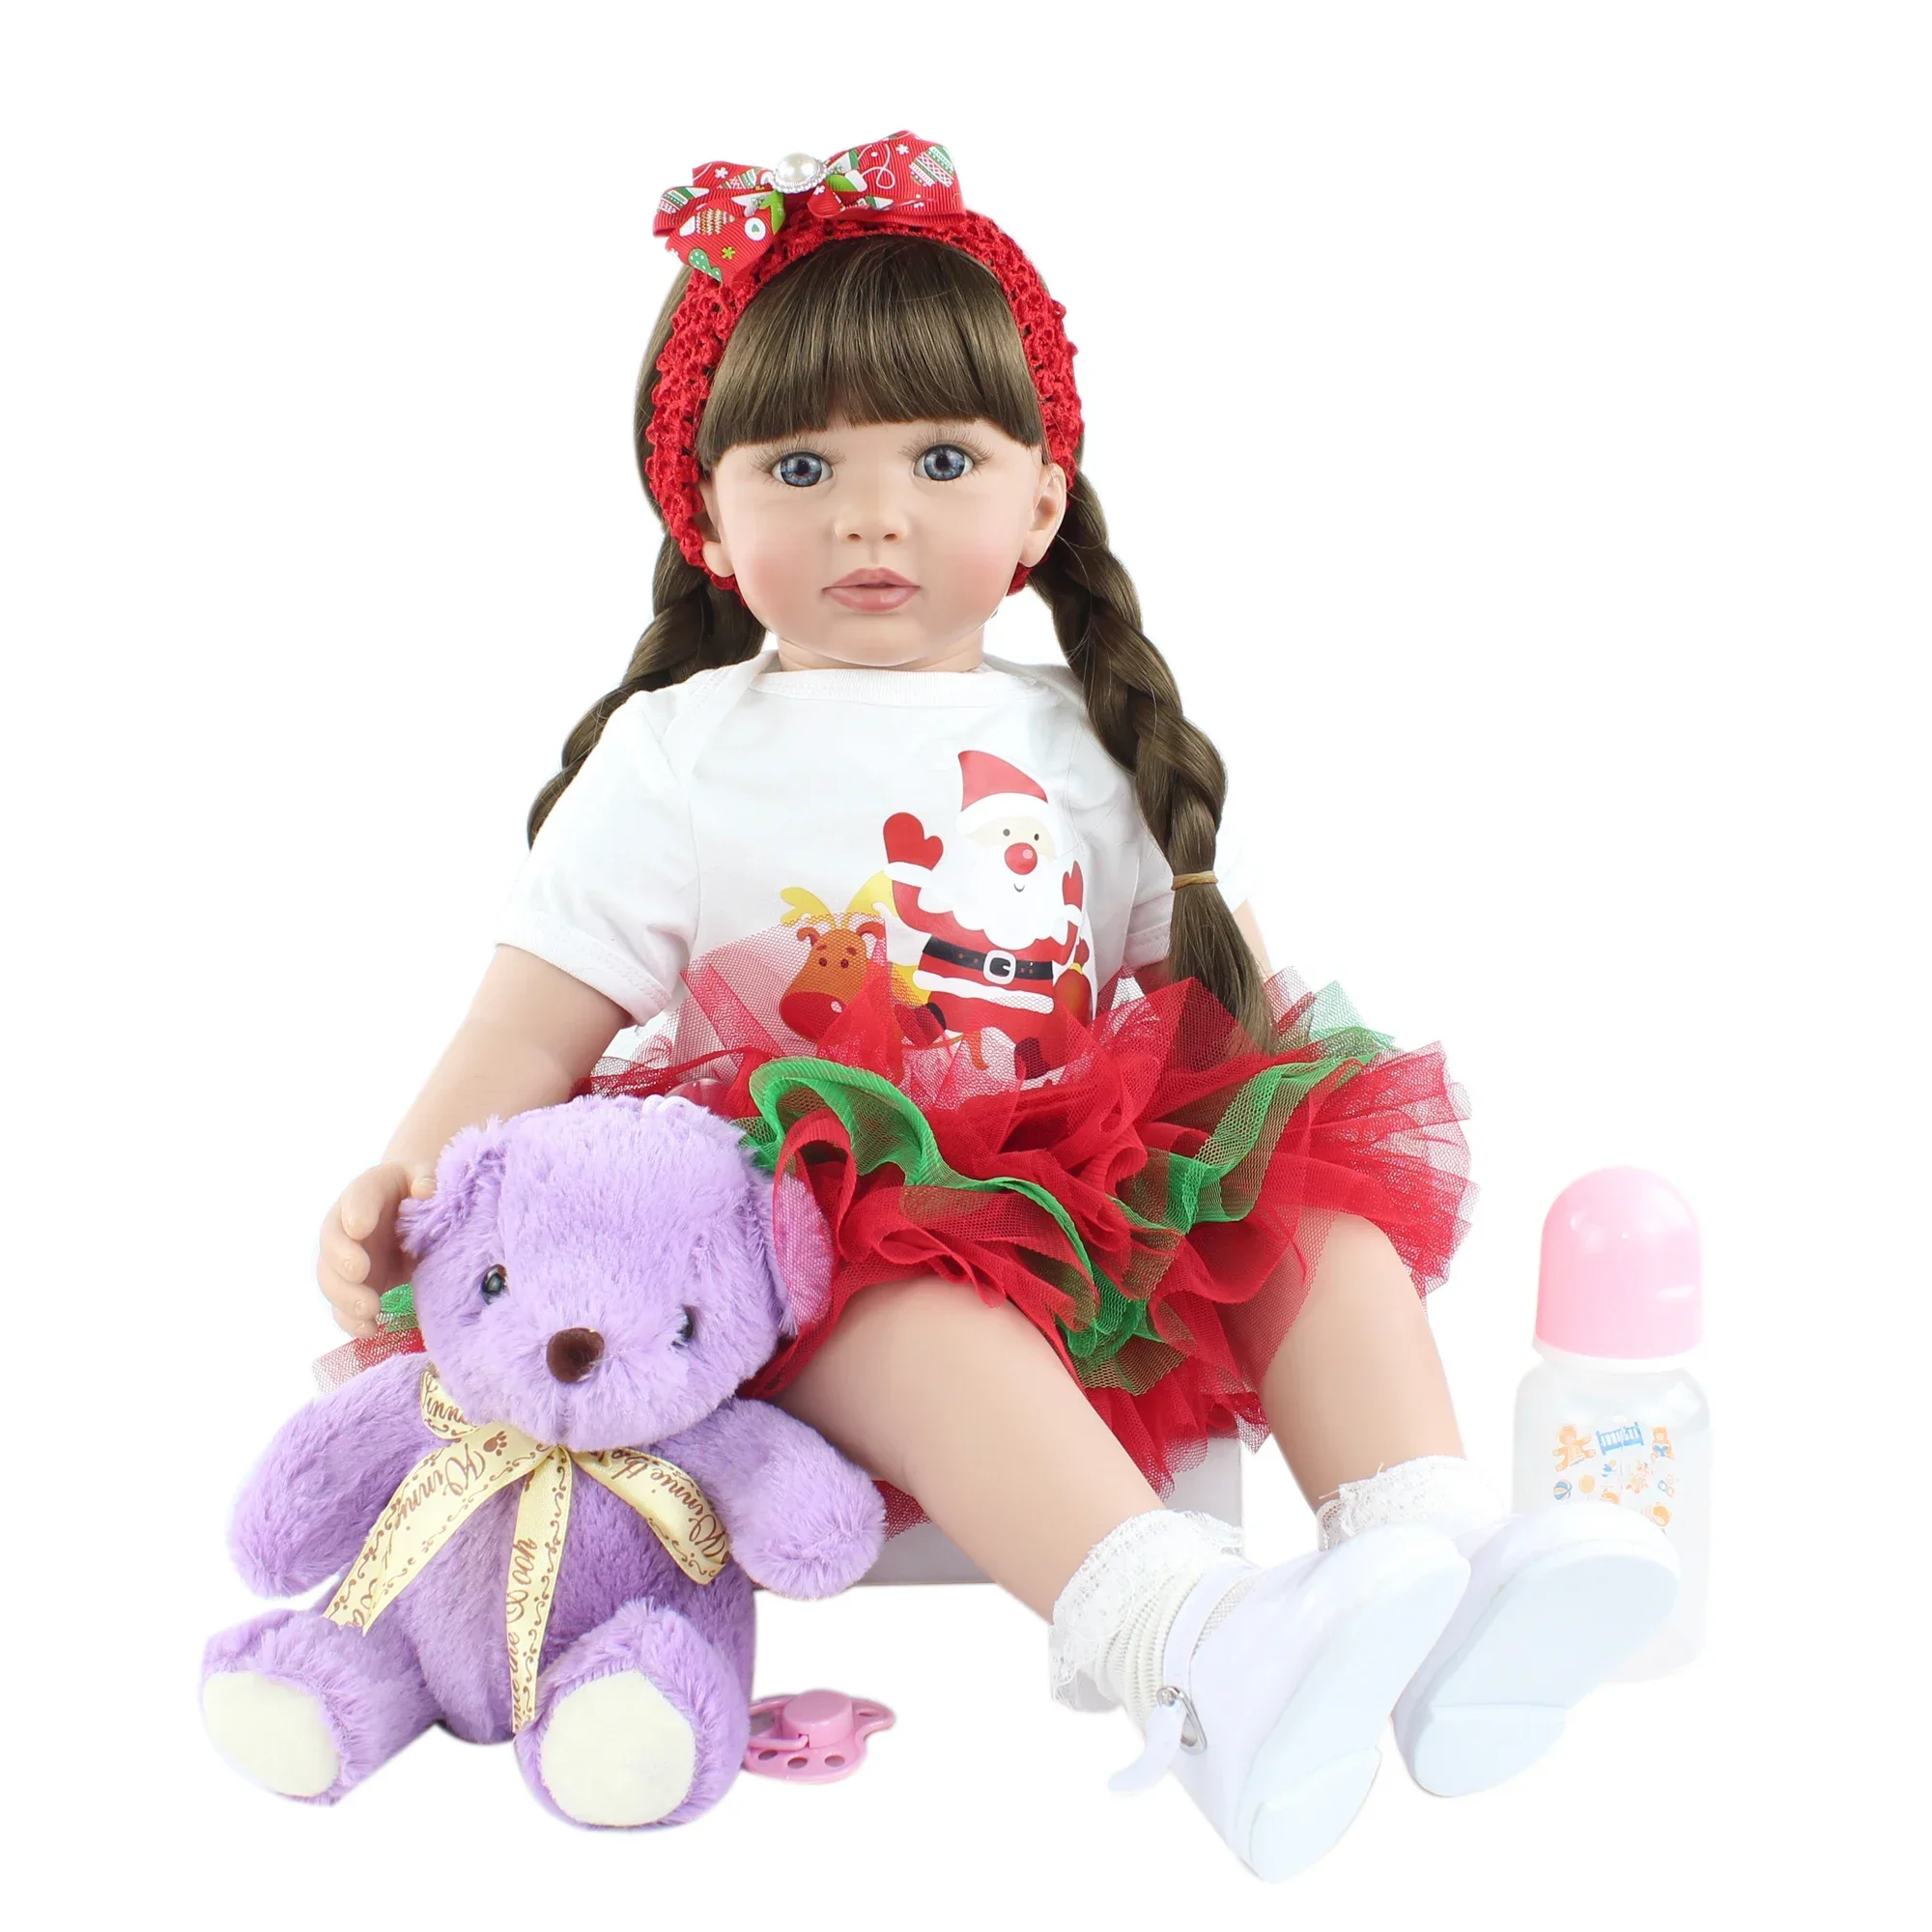 

60 CM Lifelike Reborn Baby Doll 24 Inch Alive Soft Silicone Newborn Princess Toddler Bebe Cute Play House Toy Girl Gift